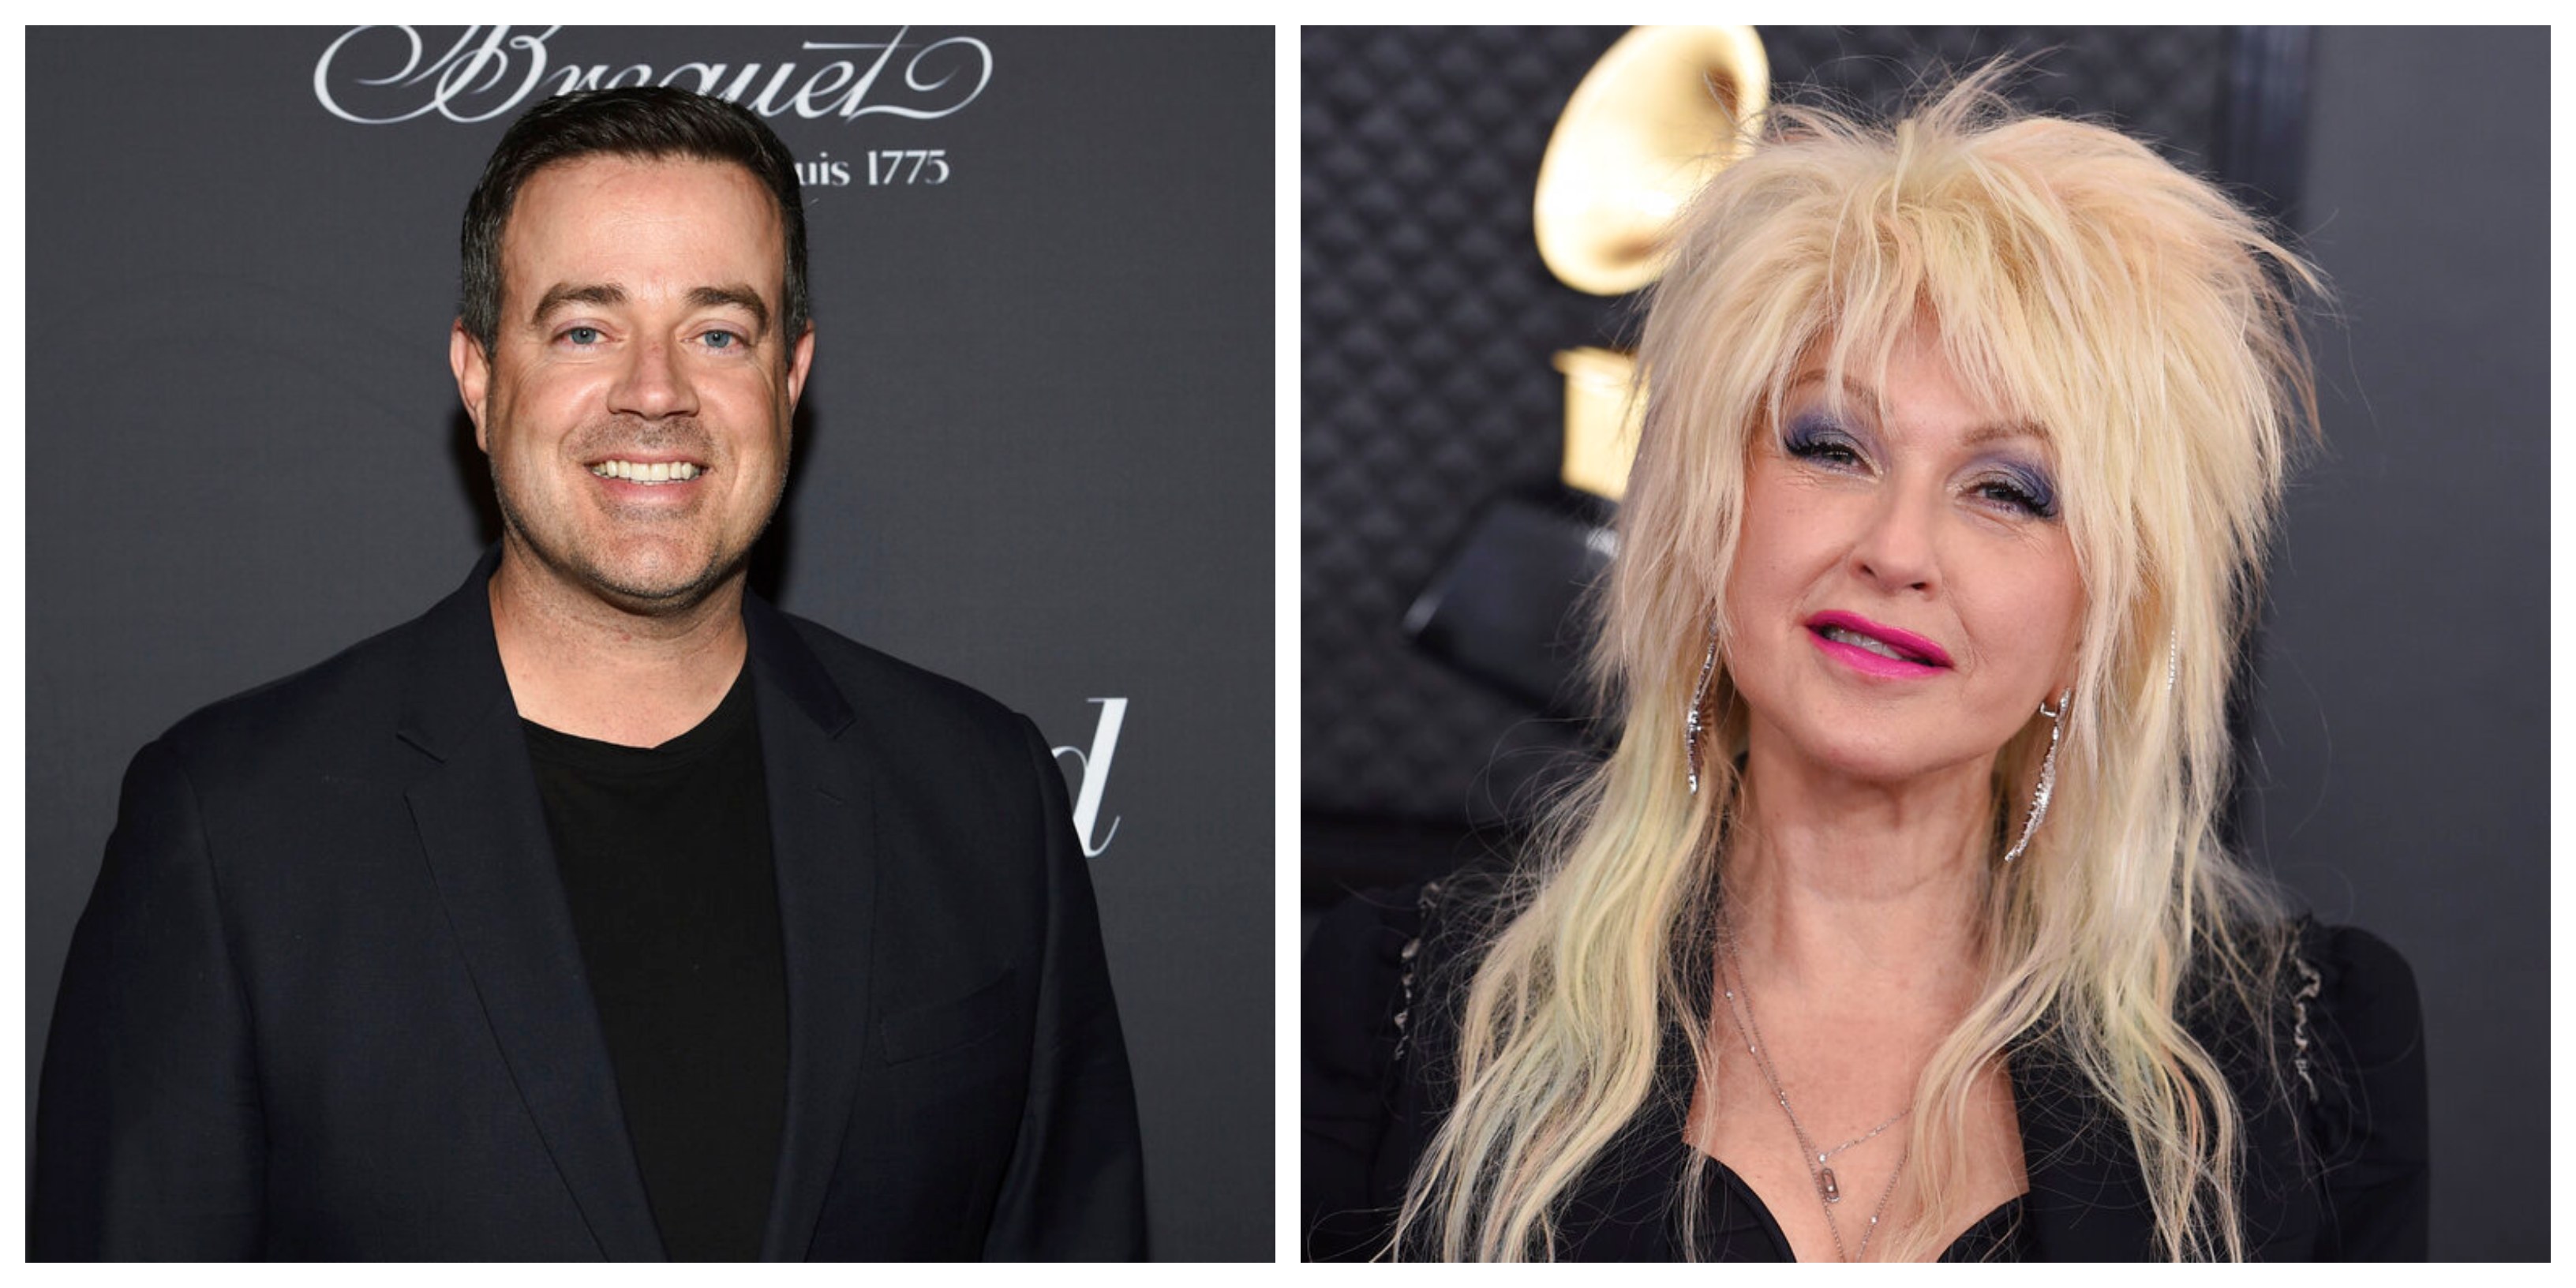 Today's famous birthdays list for June 22, 2020 includes celebrities Carson Daly, Cyndi Lauper - cleveland.com